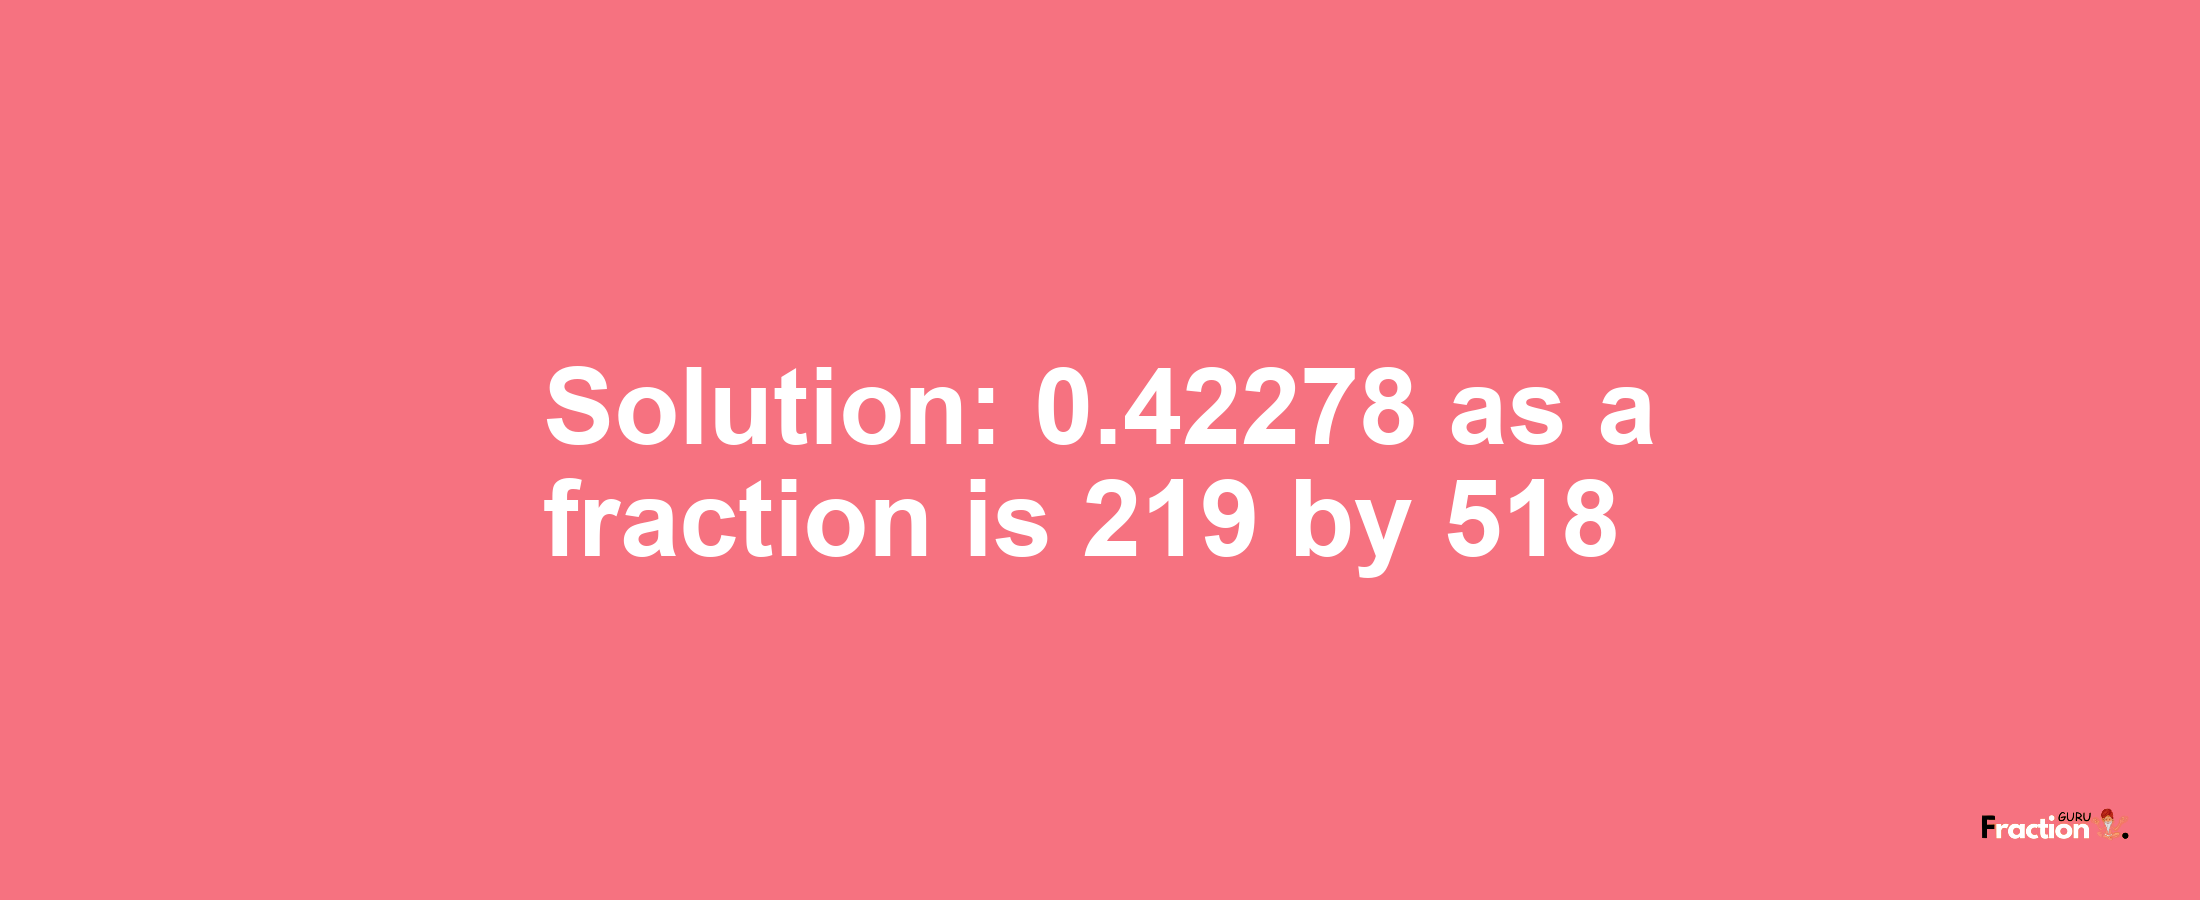 Solution:0.42278 as a fraction is 219/518